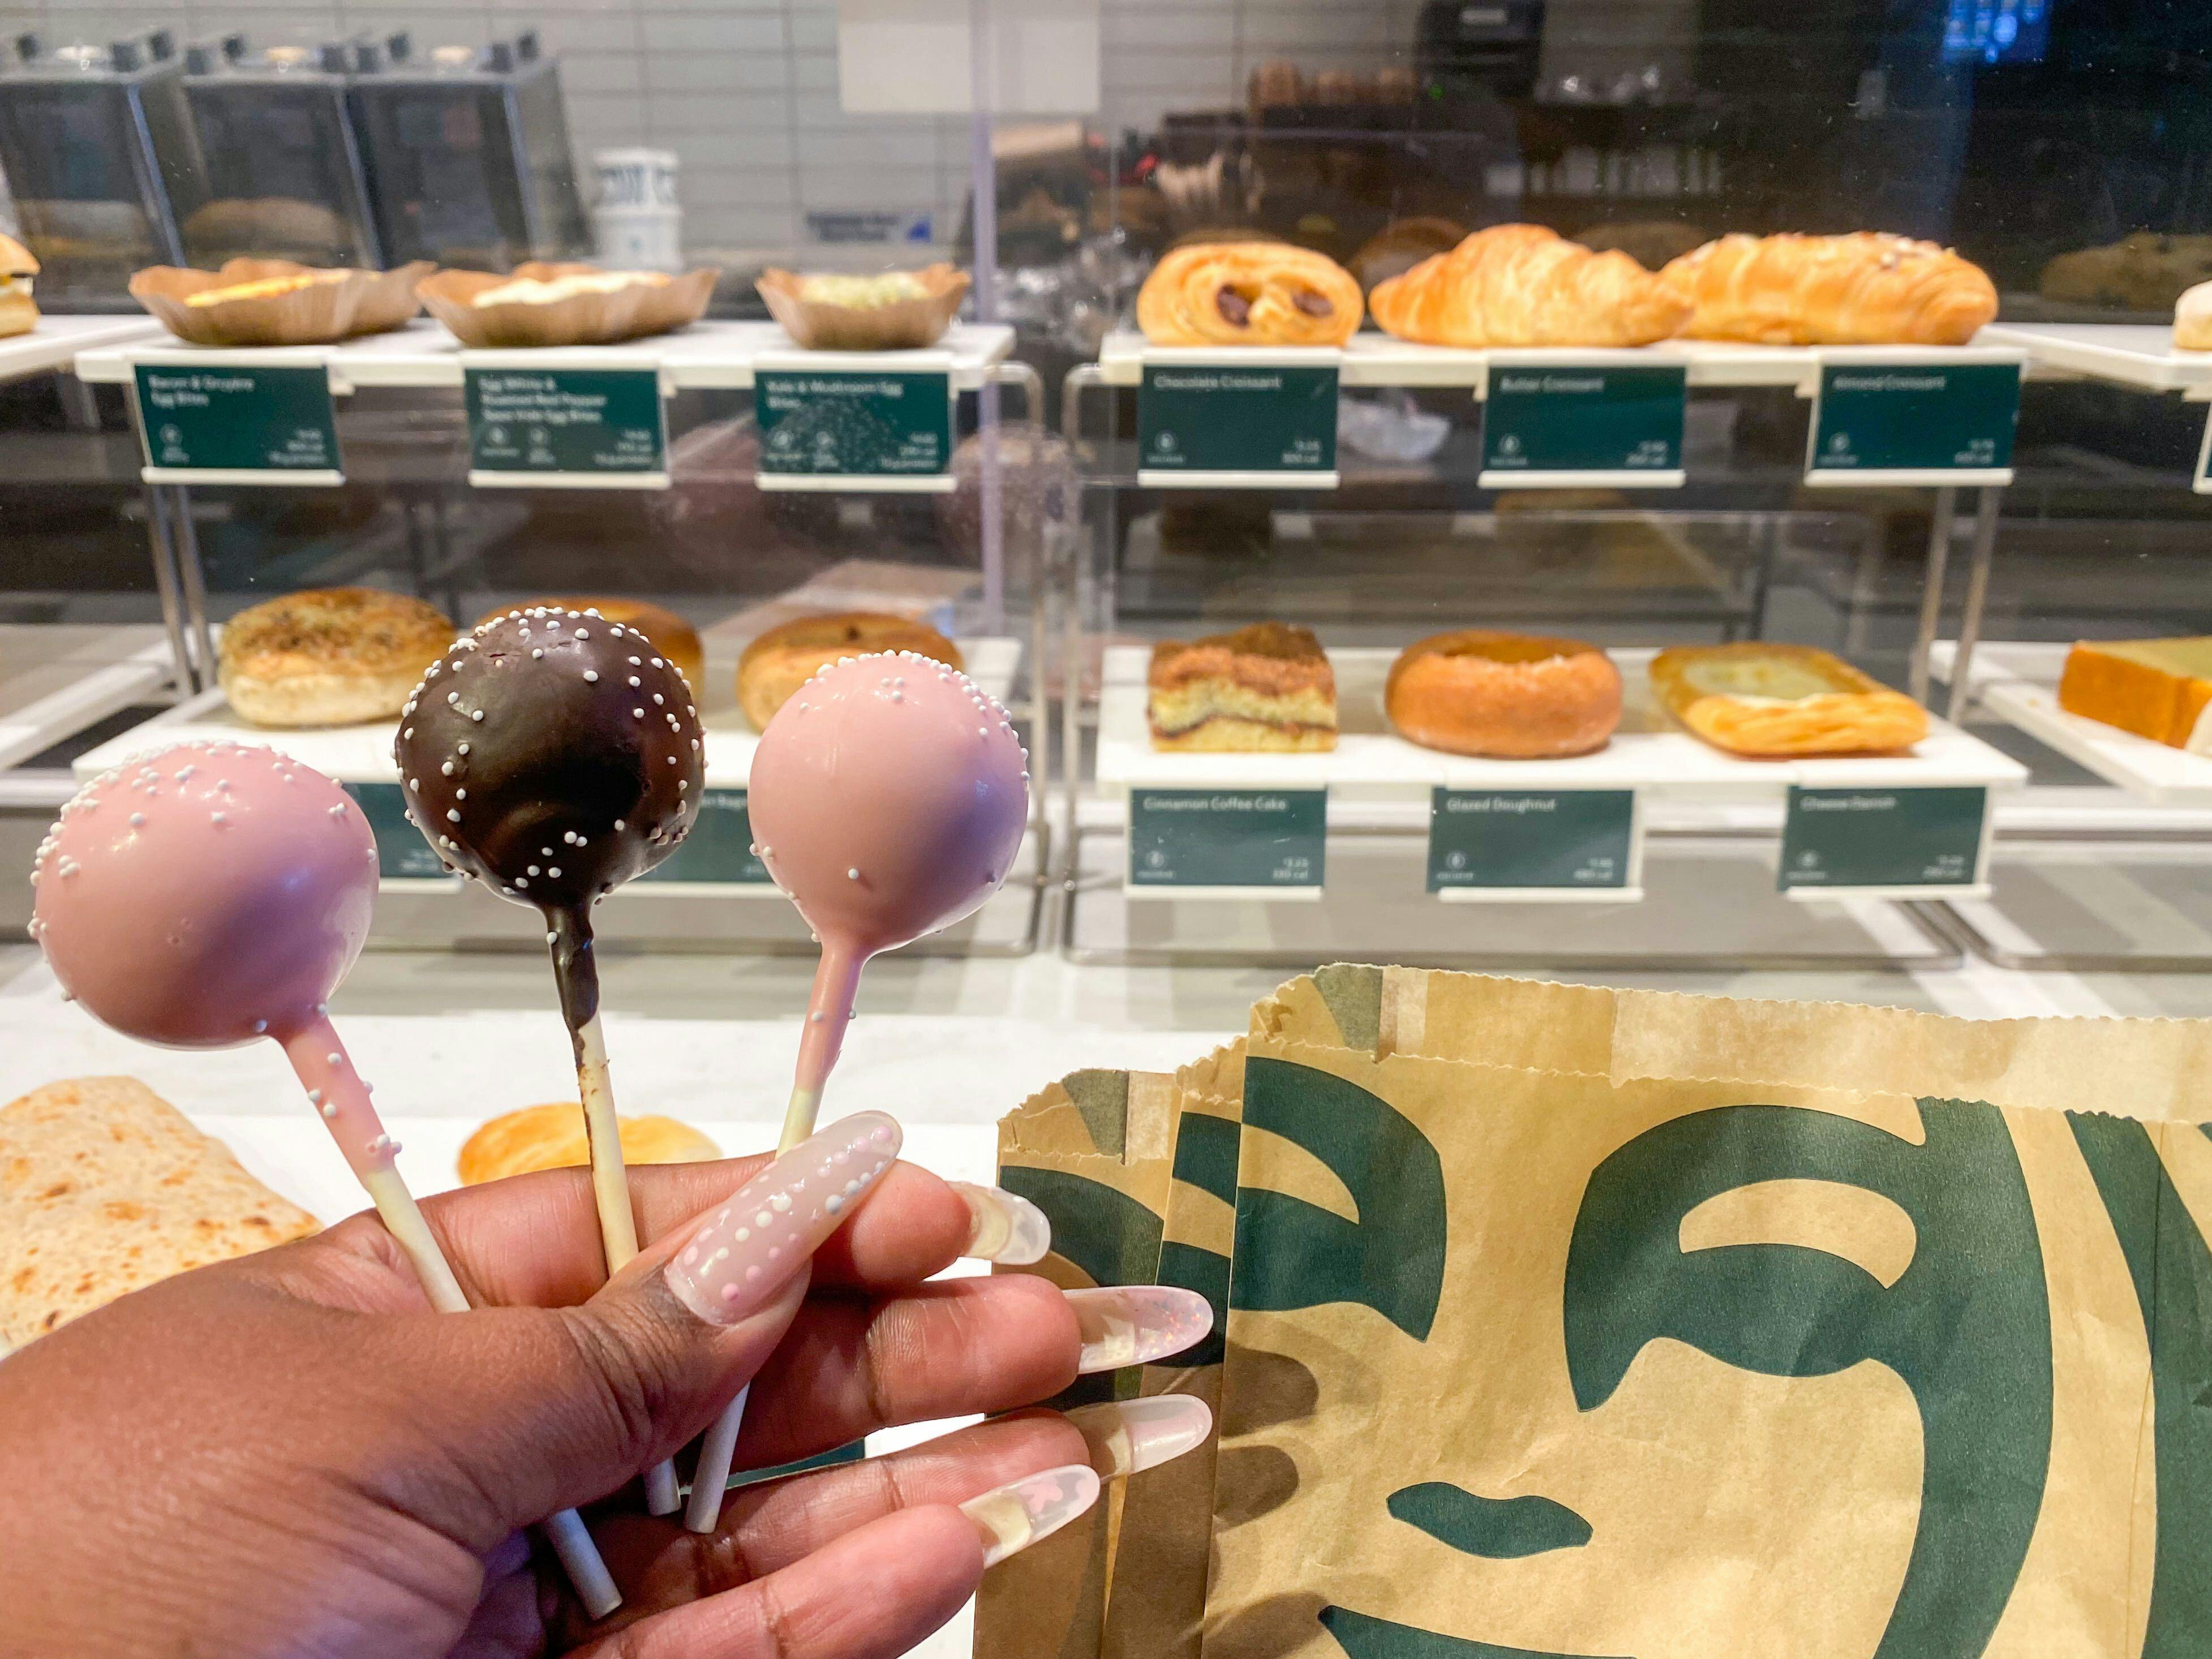 A person's hand holding up three Starbucks cake pops in front of the enclosed food display at a Starbucks counter.